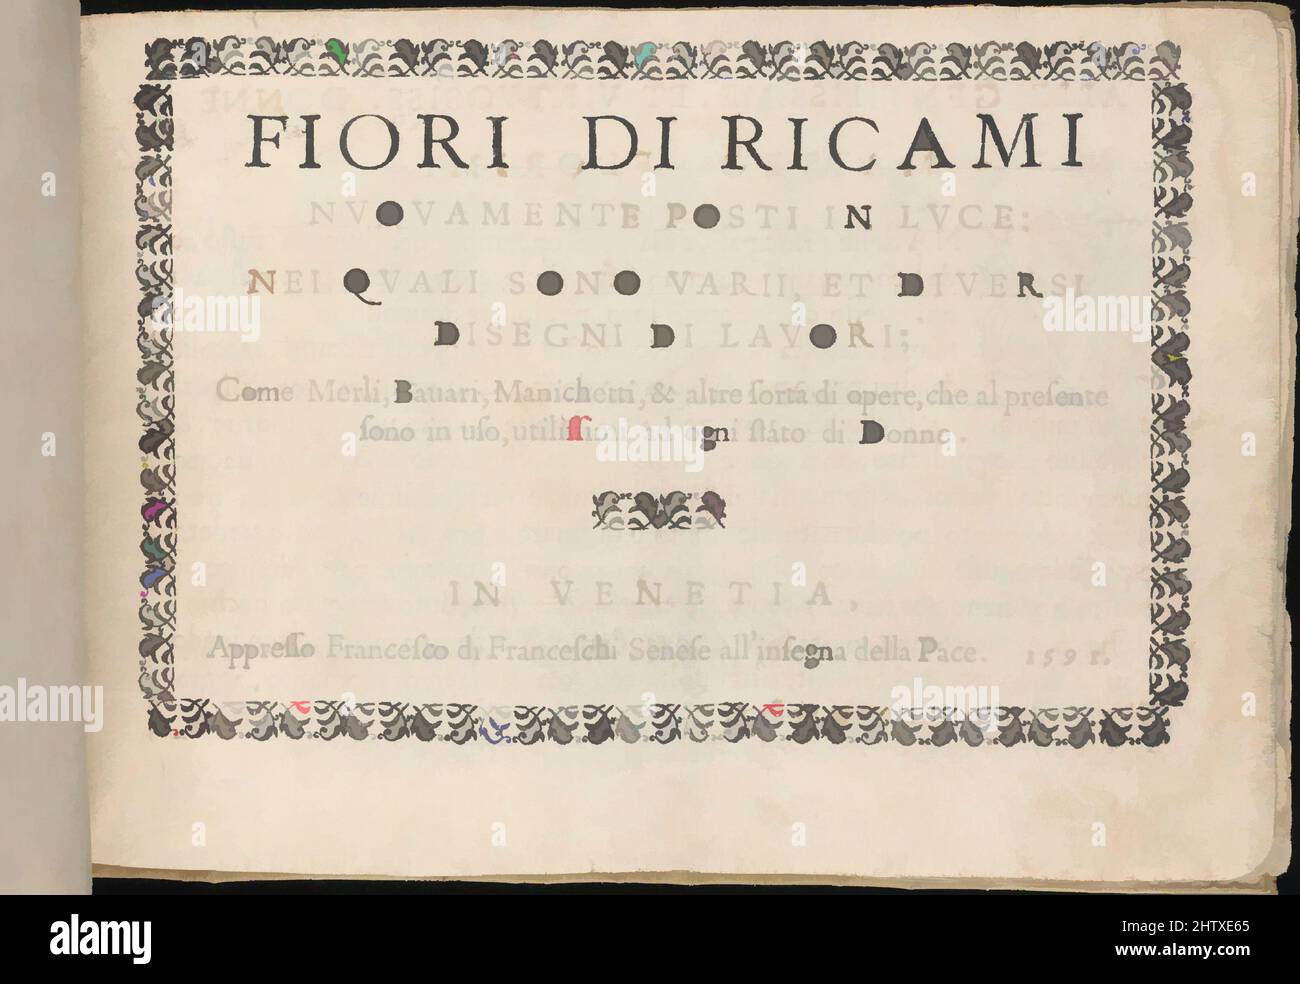 Art inspired by Fiori di Ricami Nuovamente Posti in Luce, 1591, Woodcut, Overall: 5 1/2 x 7 7/8 in. (14 x 20 cm), Designed by Matteo Florimi, Italian, active Siena, ca. 1581-died 1613, published by Francesco de' Franceschi, Italian, active 16th century, Venice. Title page with foliage-, Classic works modernized by Artotop with a splash of modernity. Shapes, color and value, eye-catching visual impact on art. Emotions through freedom of artworks in a contemporary way. A timeless message pursuing a wildly creative new direction. Artists turning to the digital medium and creating the Artotop NFT Stock Photo